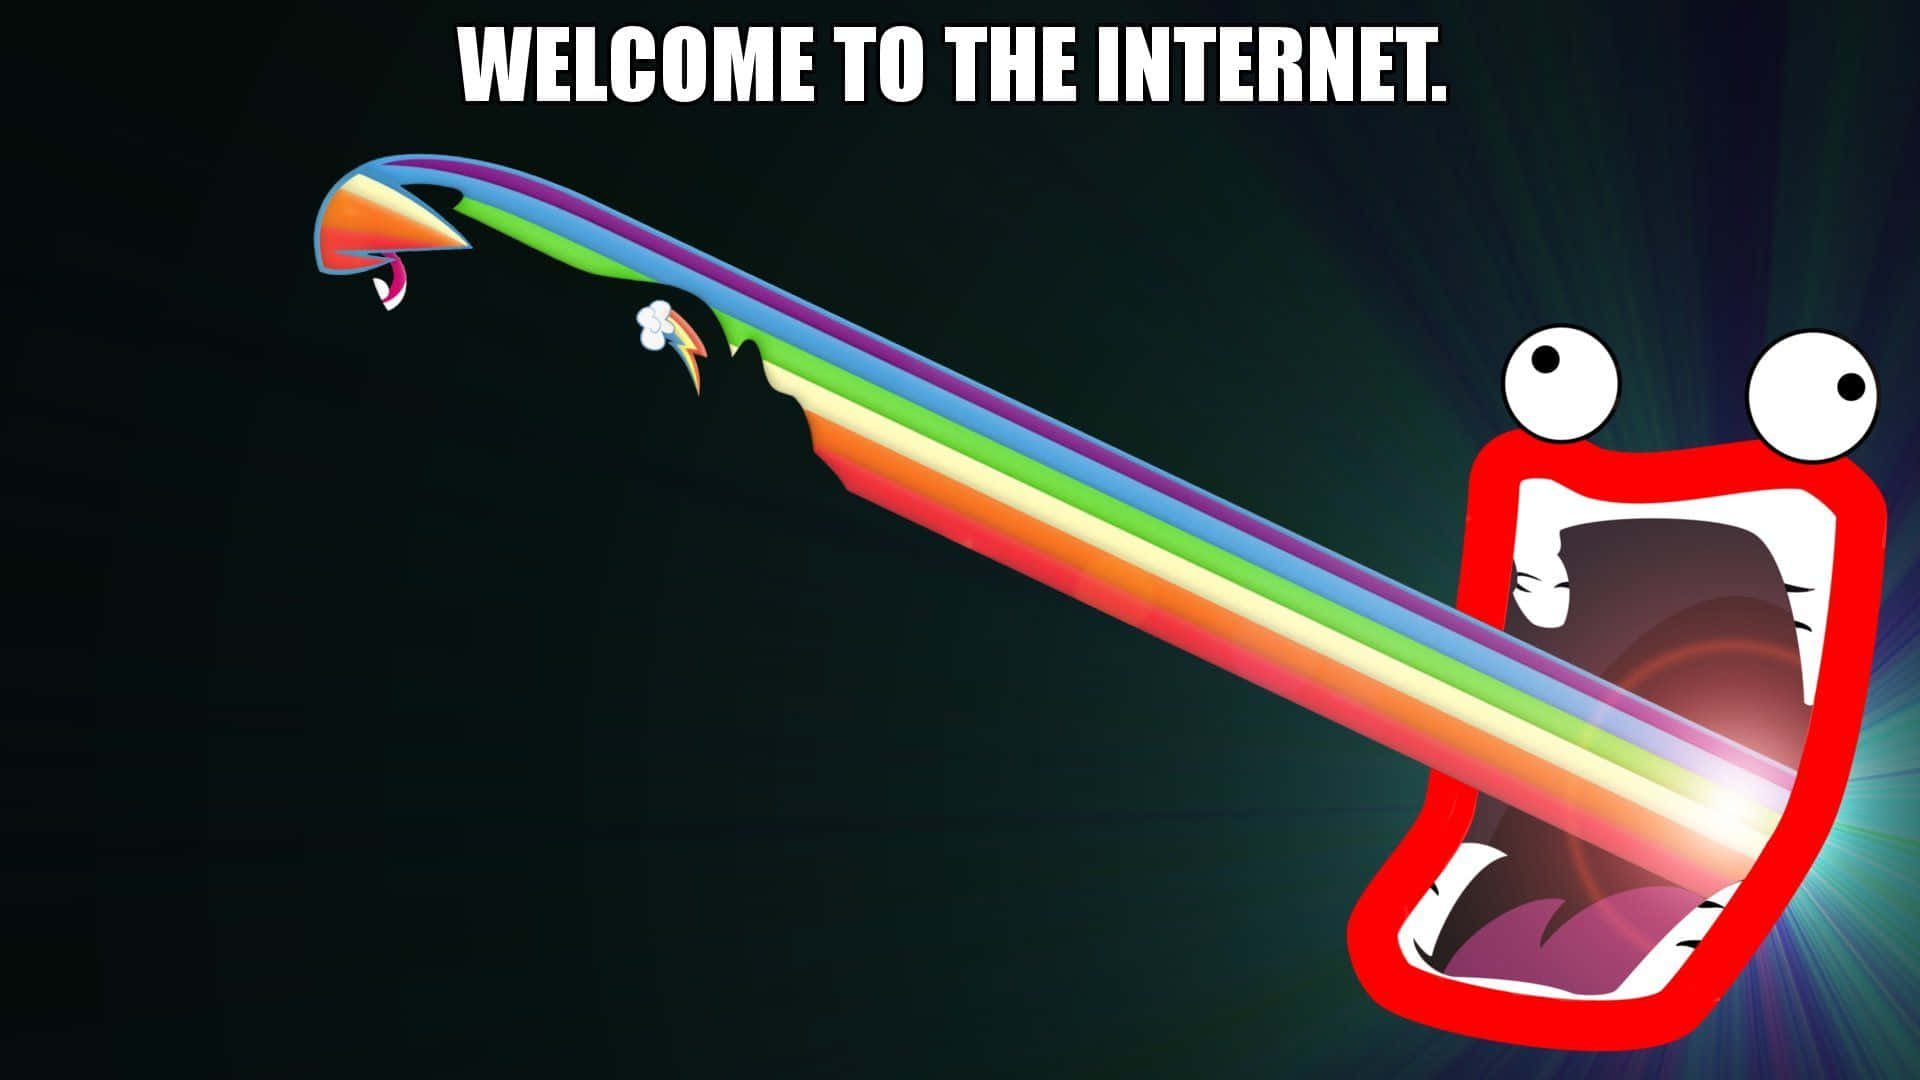 A Rainbow - Colored Rainbow With The Words Welcome To The Internet